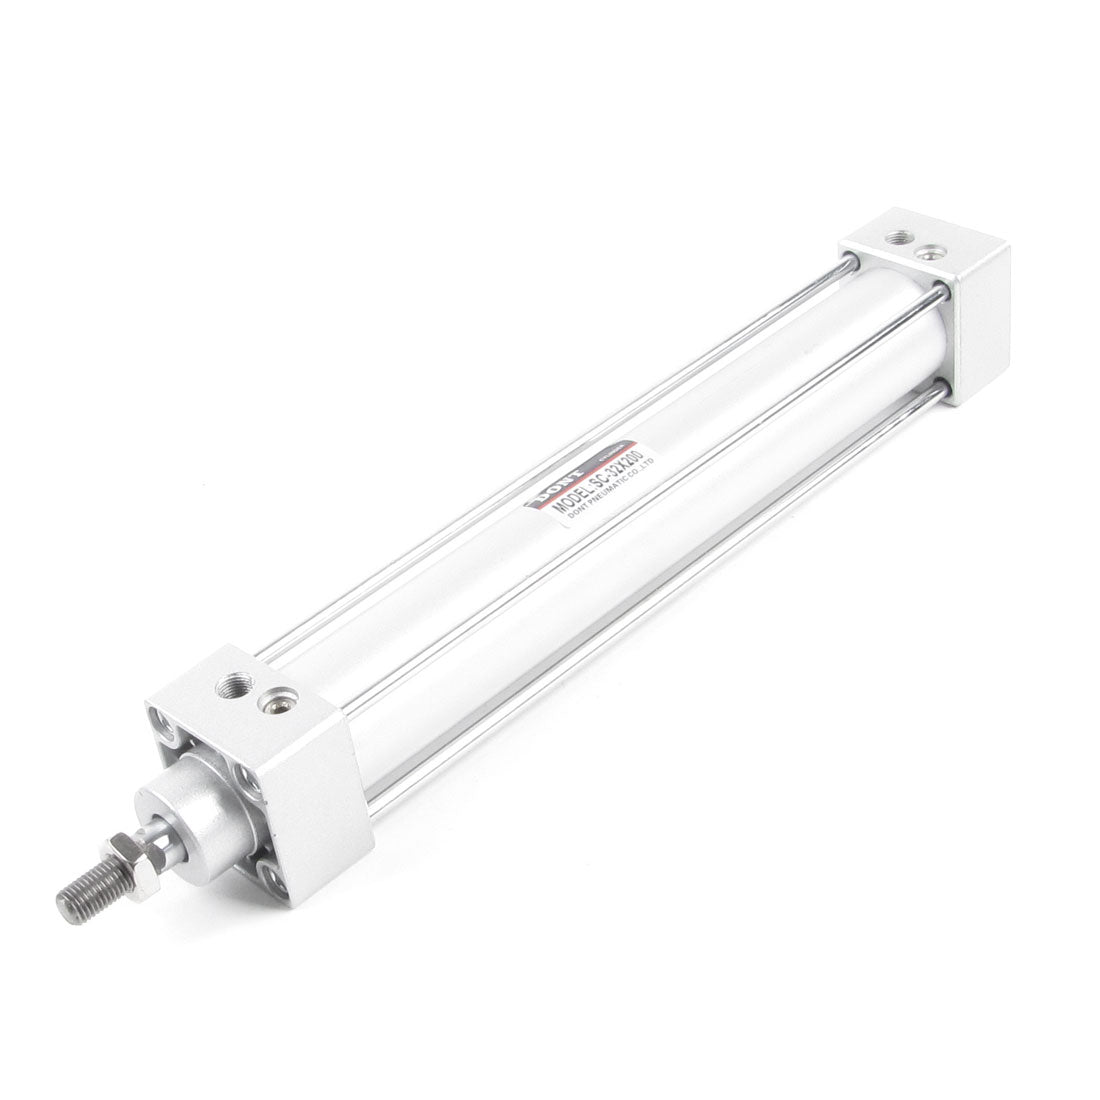 uxcell Uxcell Single Screwed Piston Rod 32 x 200 Dual Action Pneumatic Cylinder